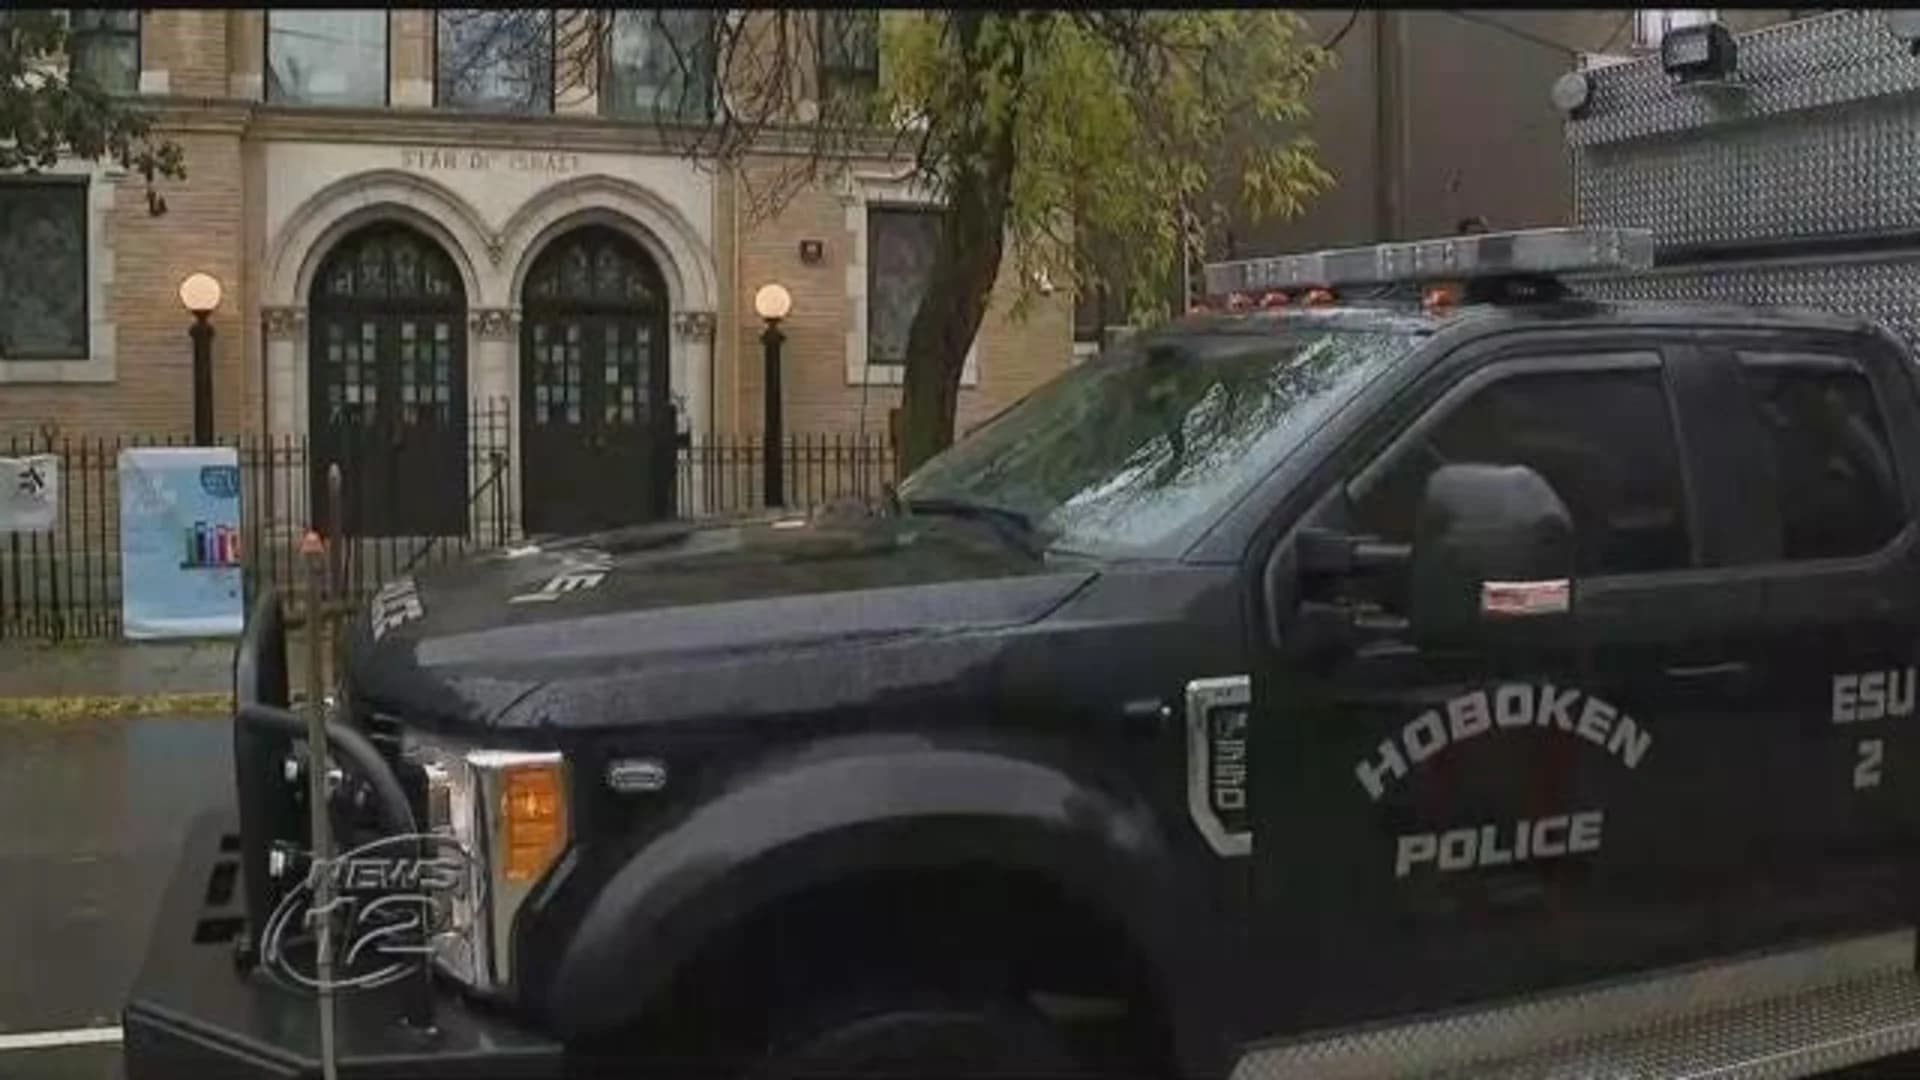 Synagogue attack prompts stepped up security around New Jersey